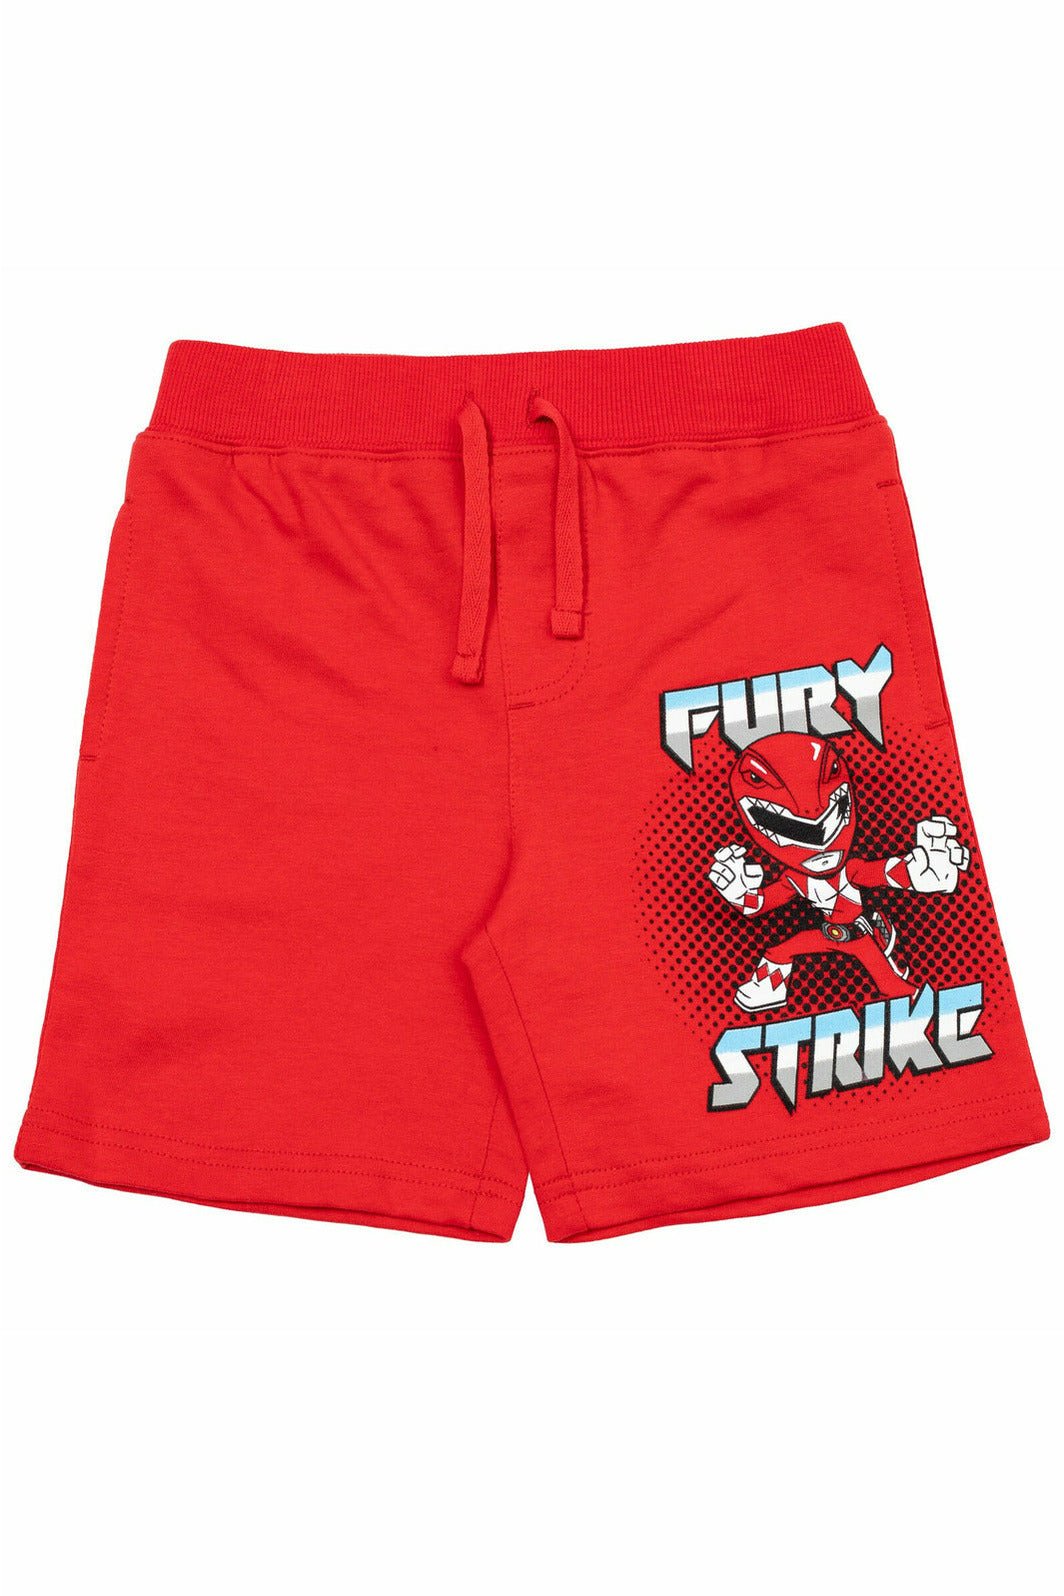 Power Rangers French Terry 2 Pack Fashion Shorts